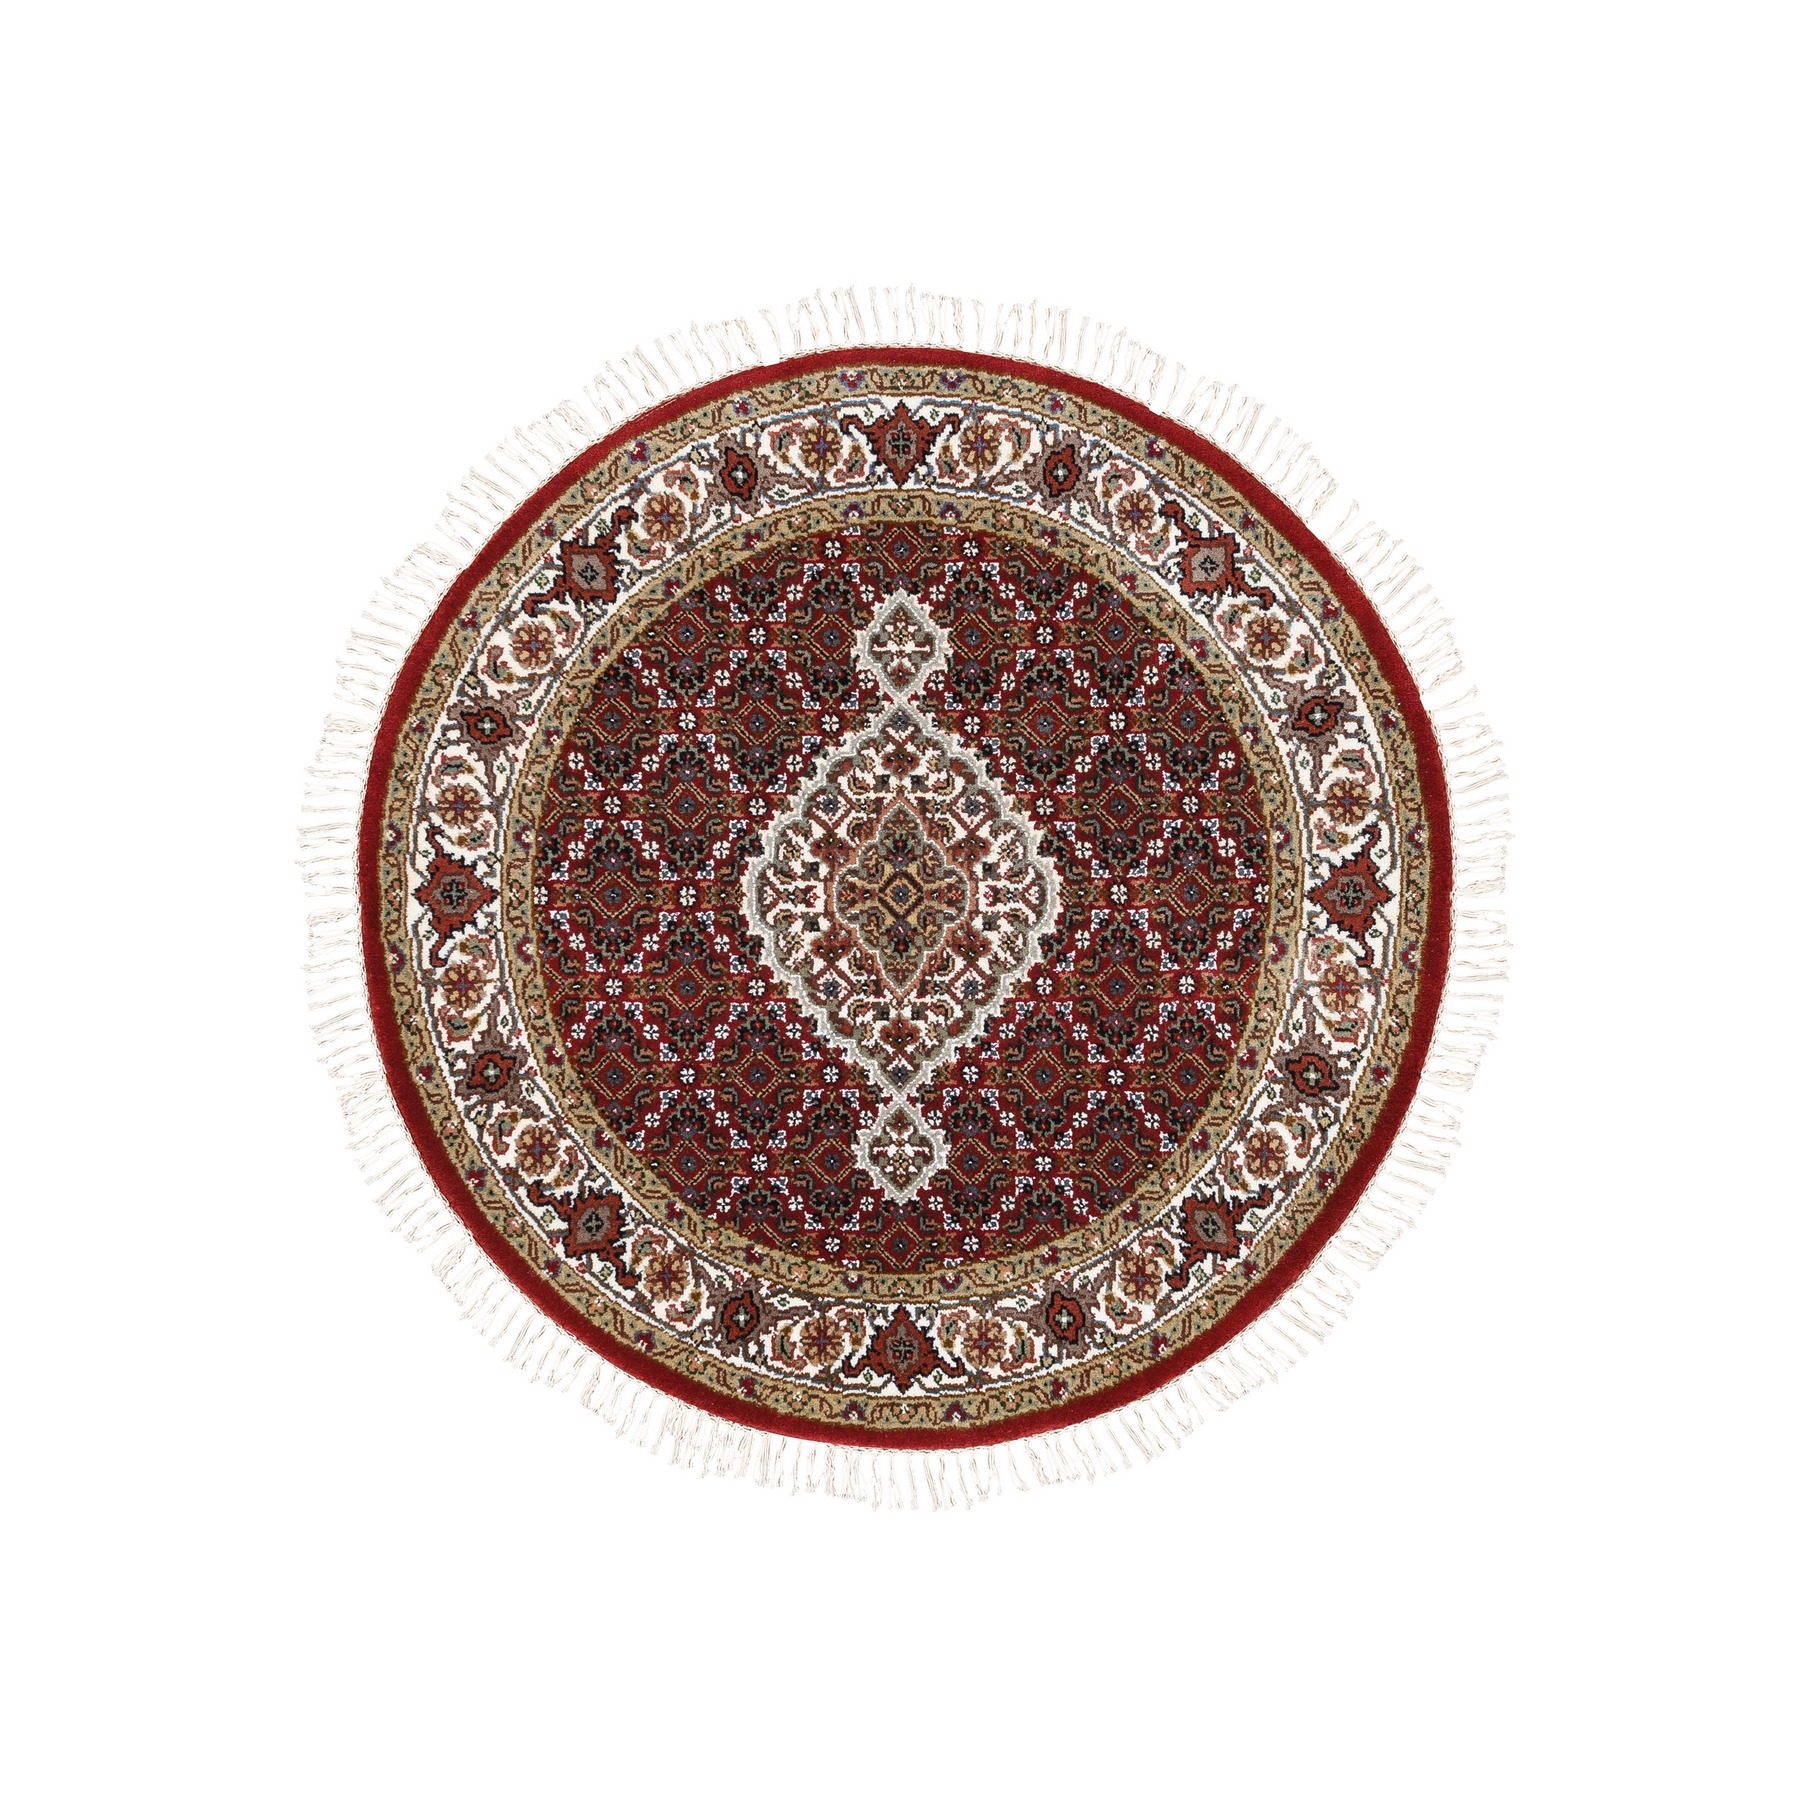 Pirniakan Collection Hand Knotted Red Rug No: 1124910